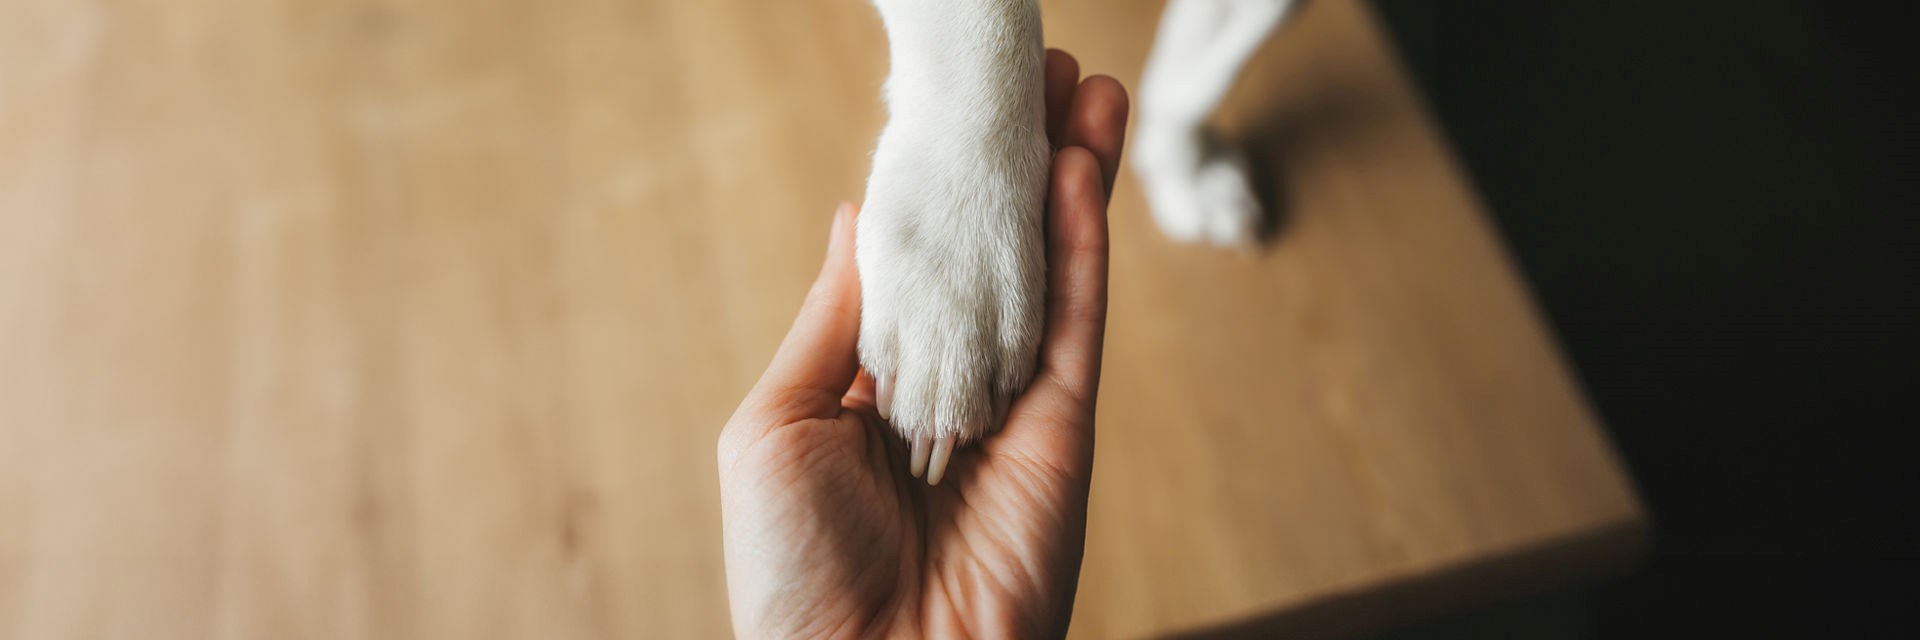 A dog's paw held gently in a human hand